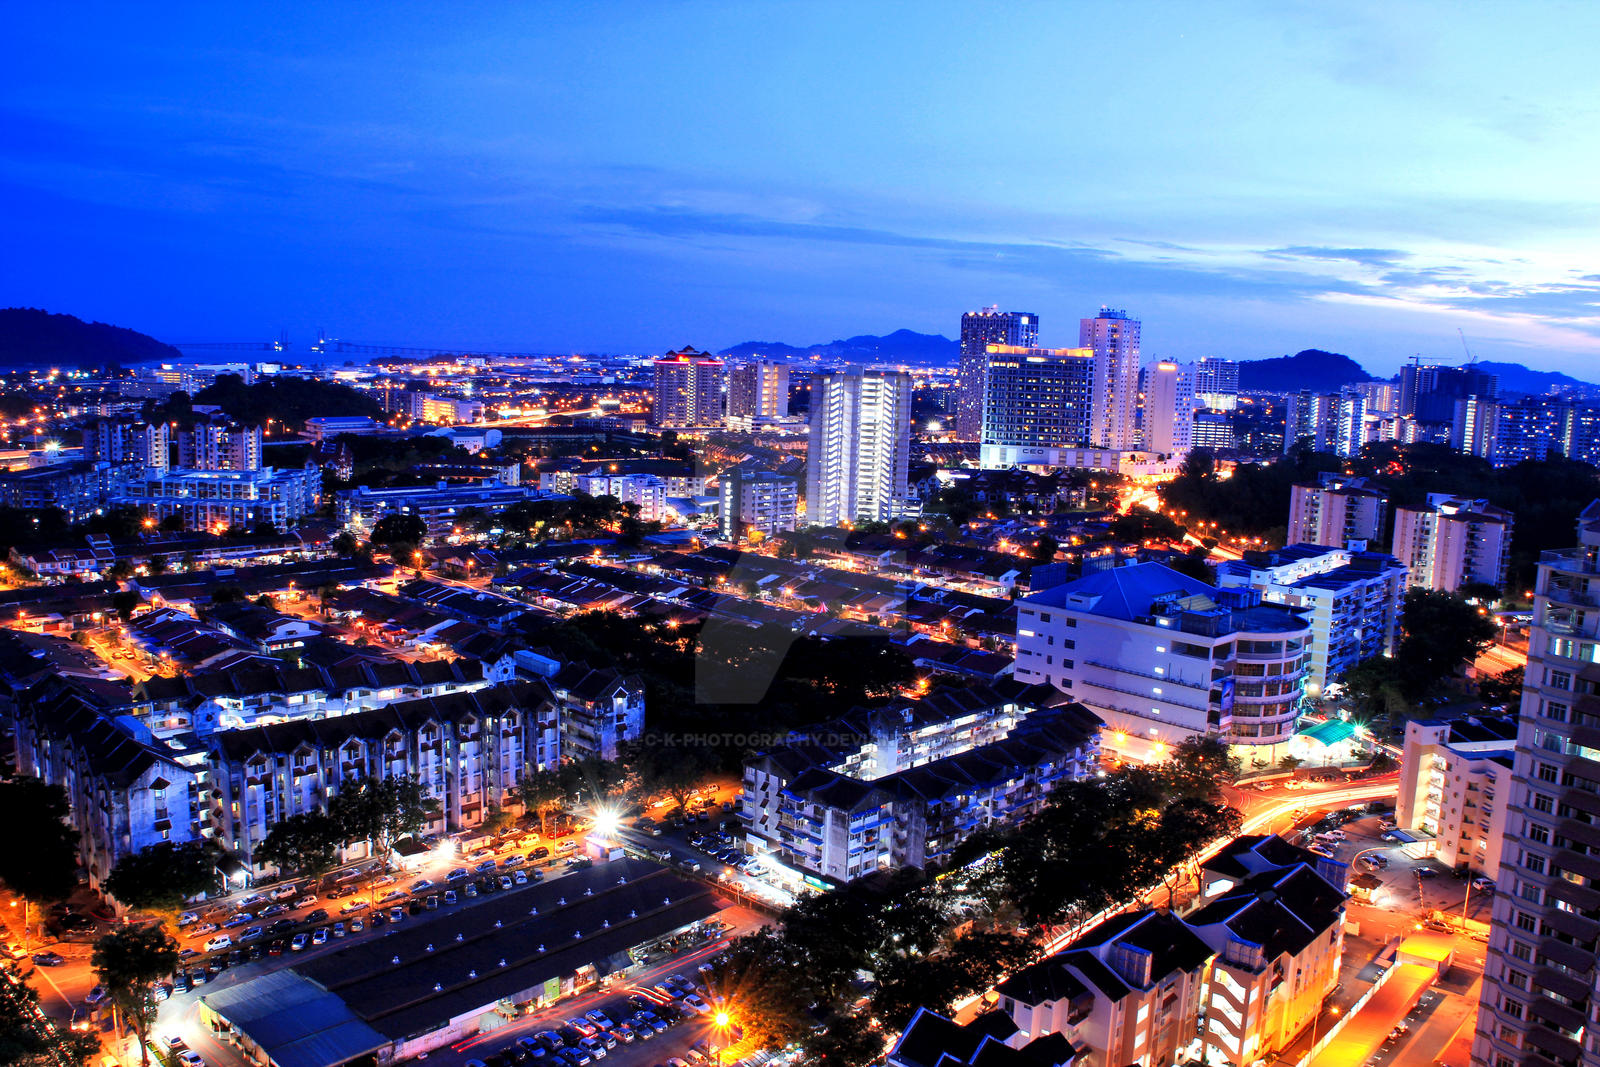 Penang Night View From Jubilee Garden II by L-C-K-PHOTOGRAPHY on DeviantArt